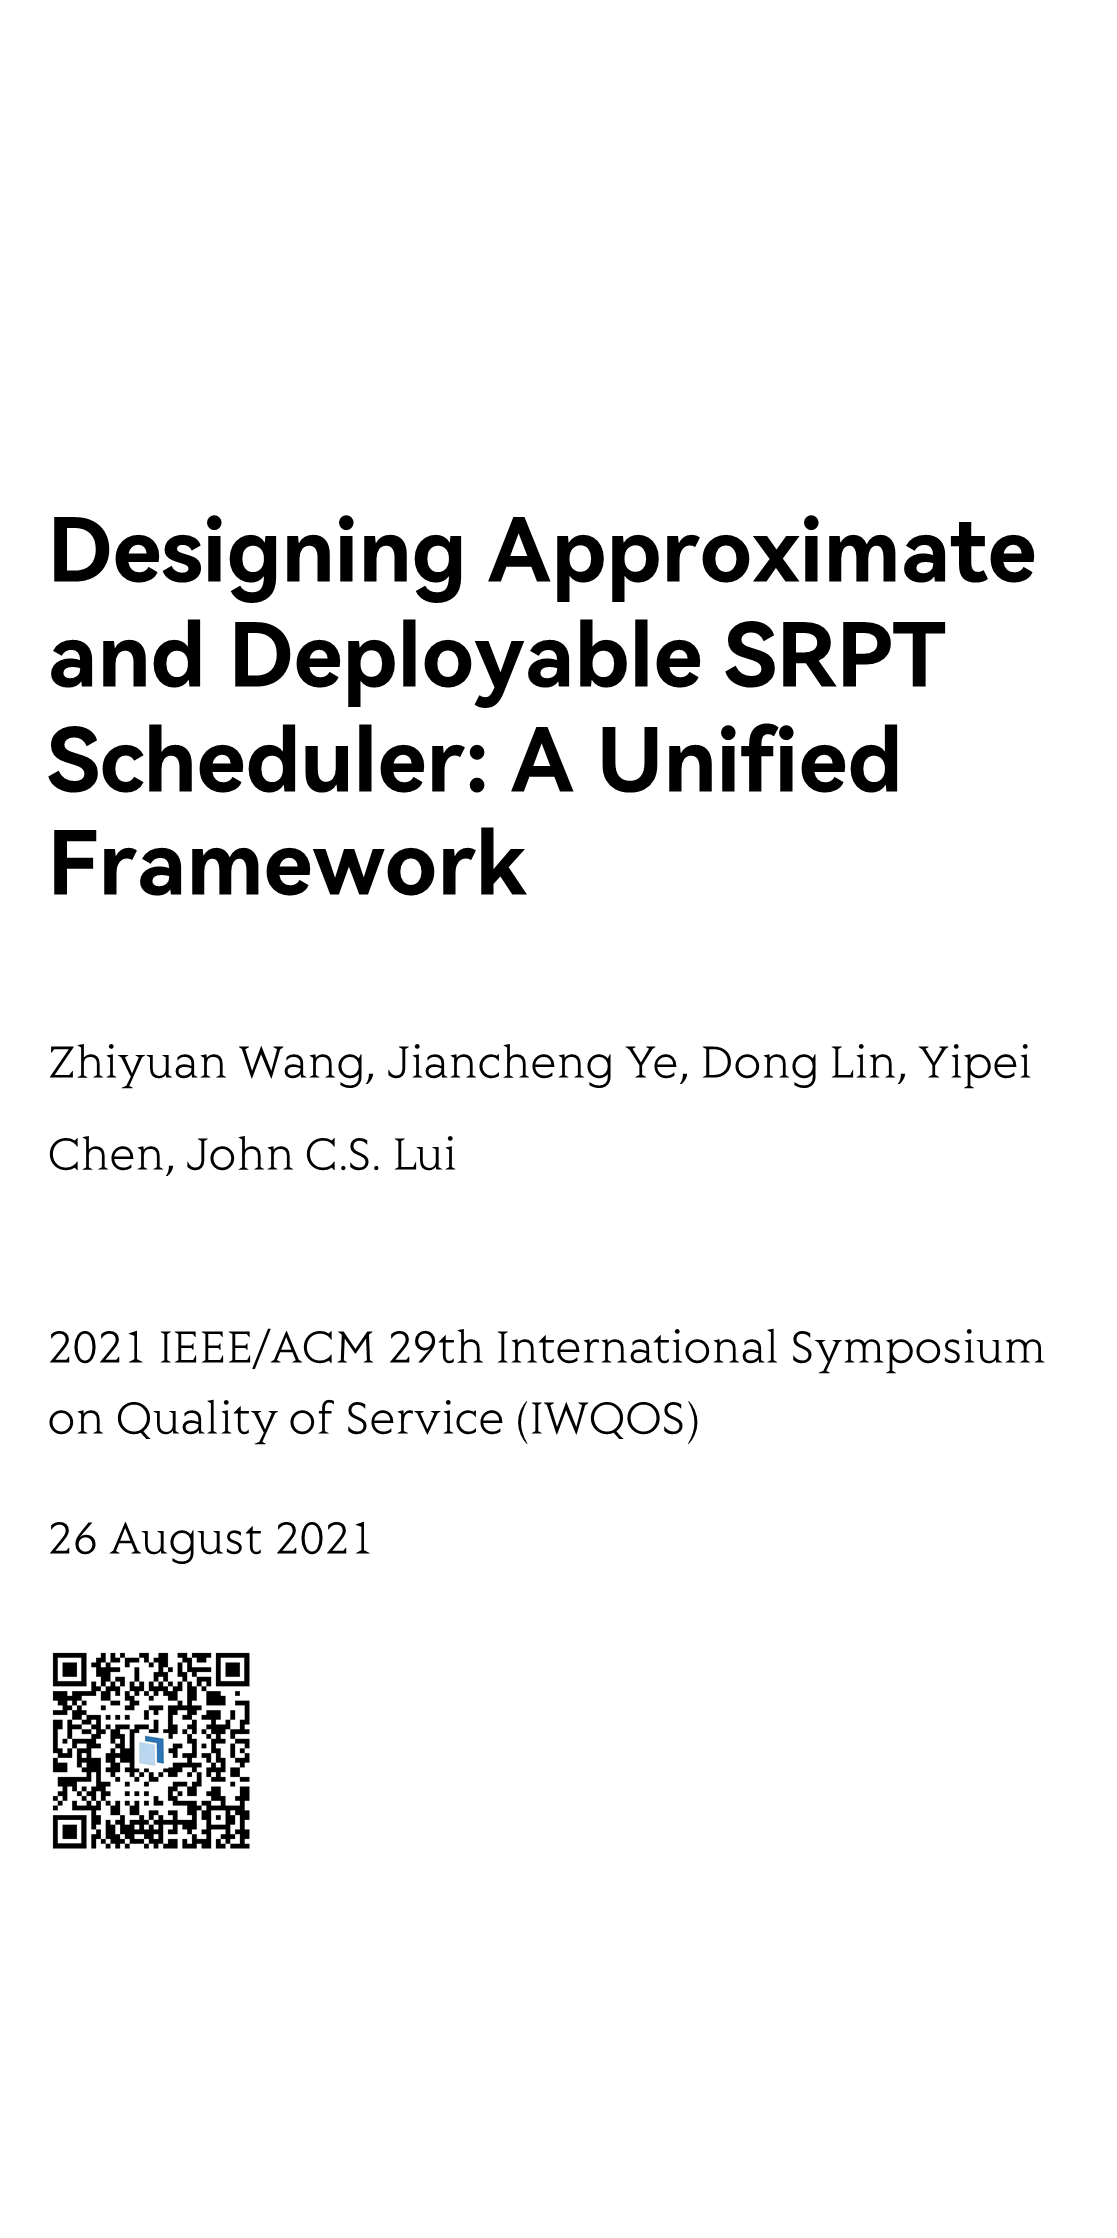 Designing Approximate and Deployable SRPT Scheduler: A Unified Framework_1